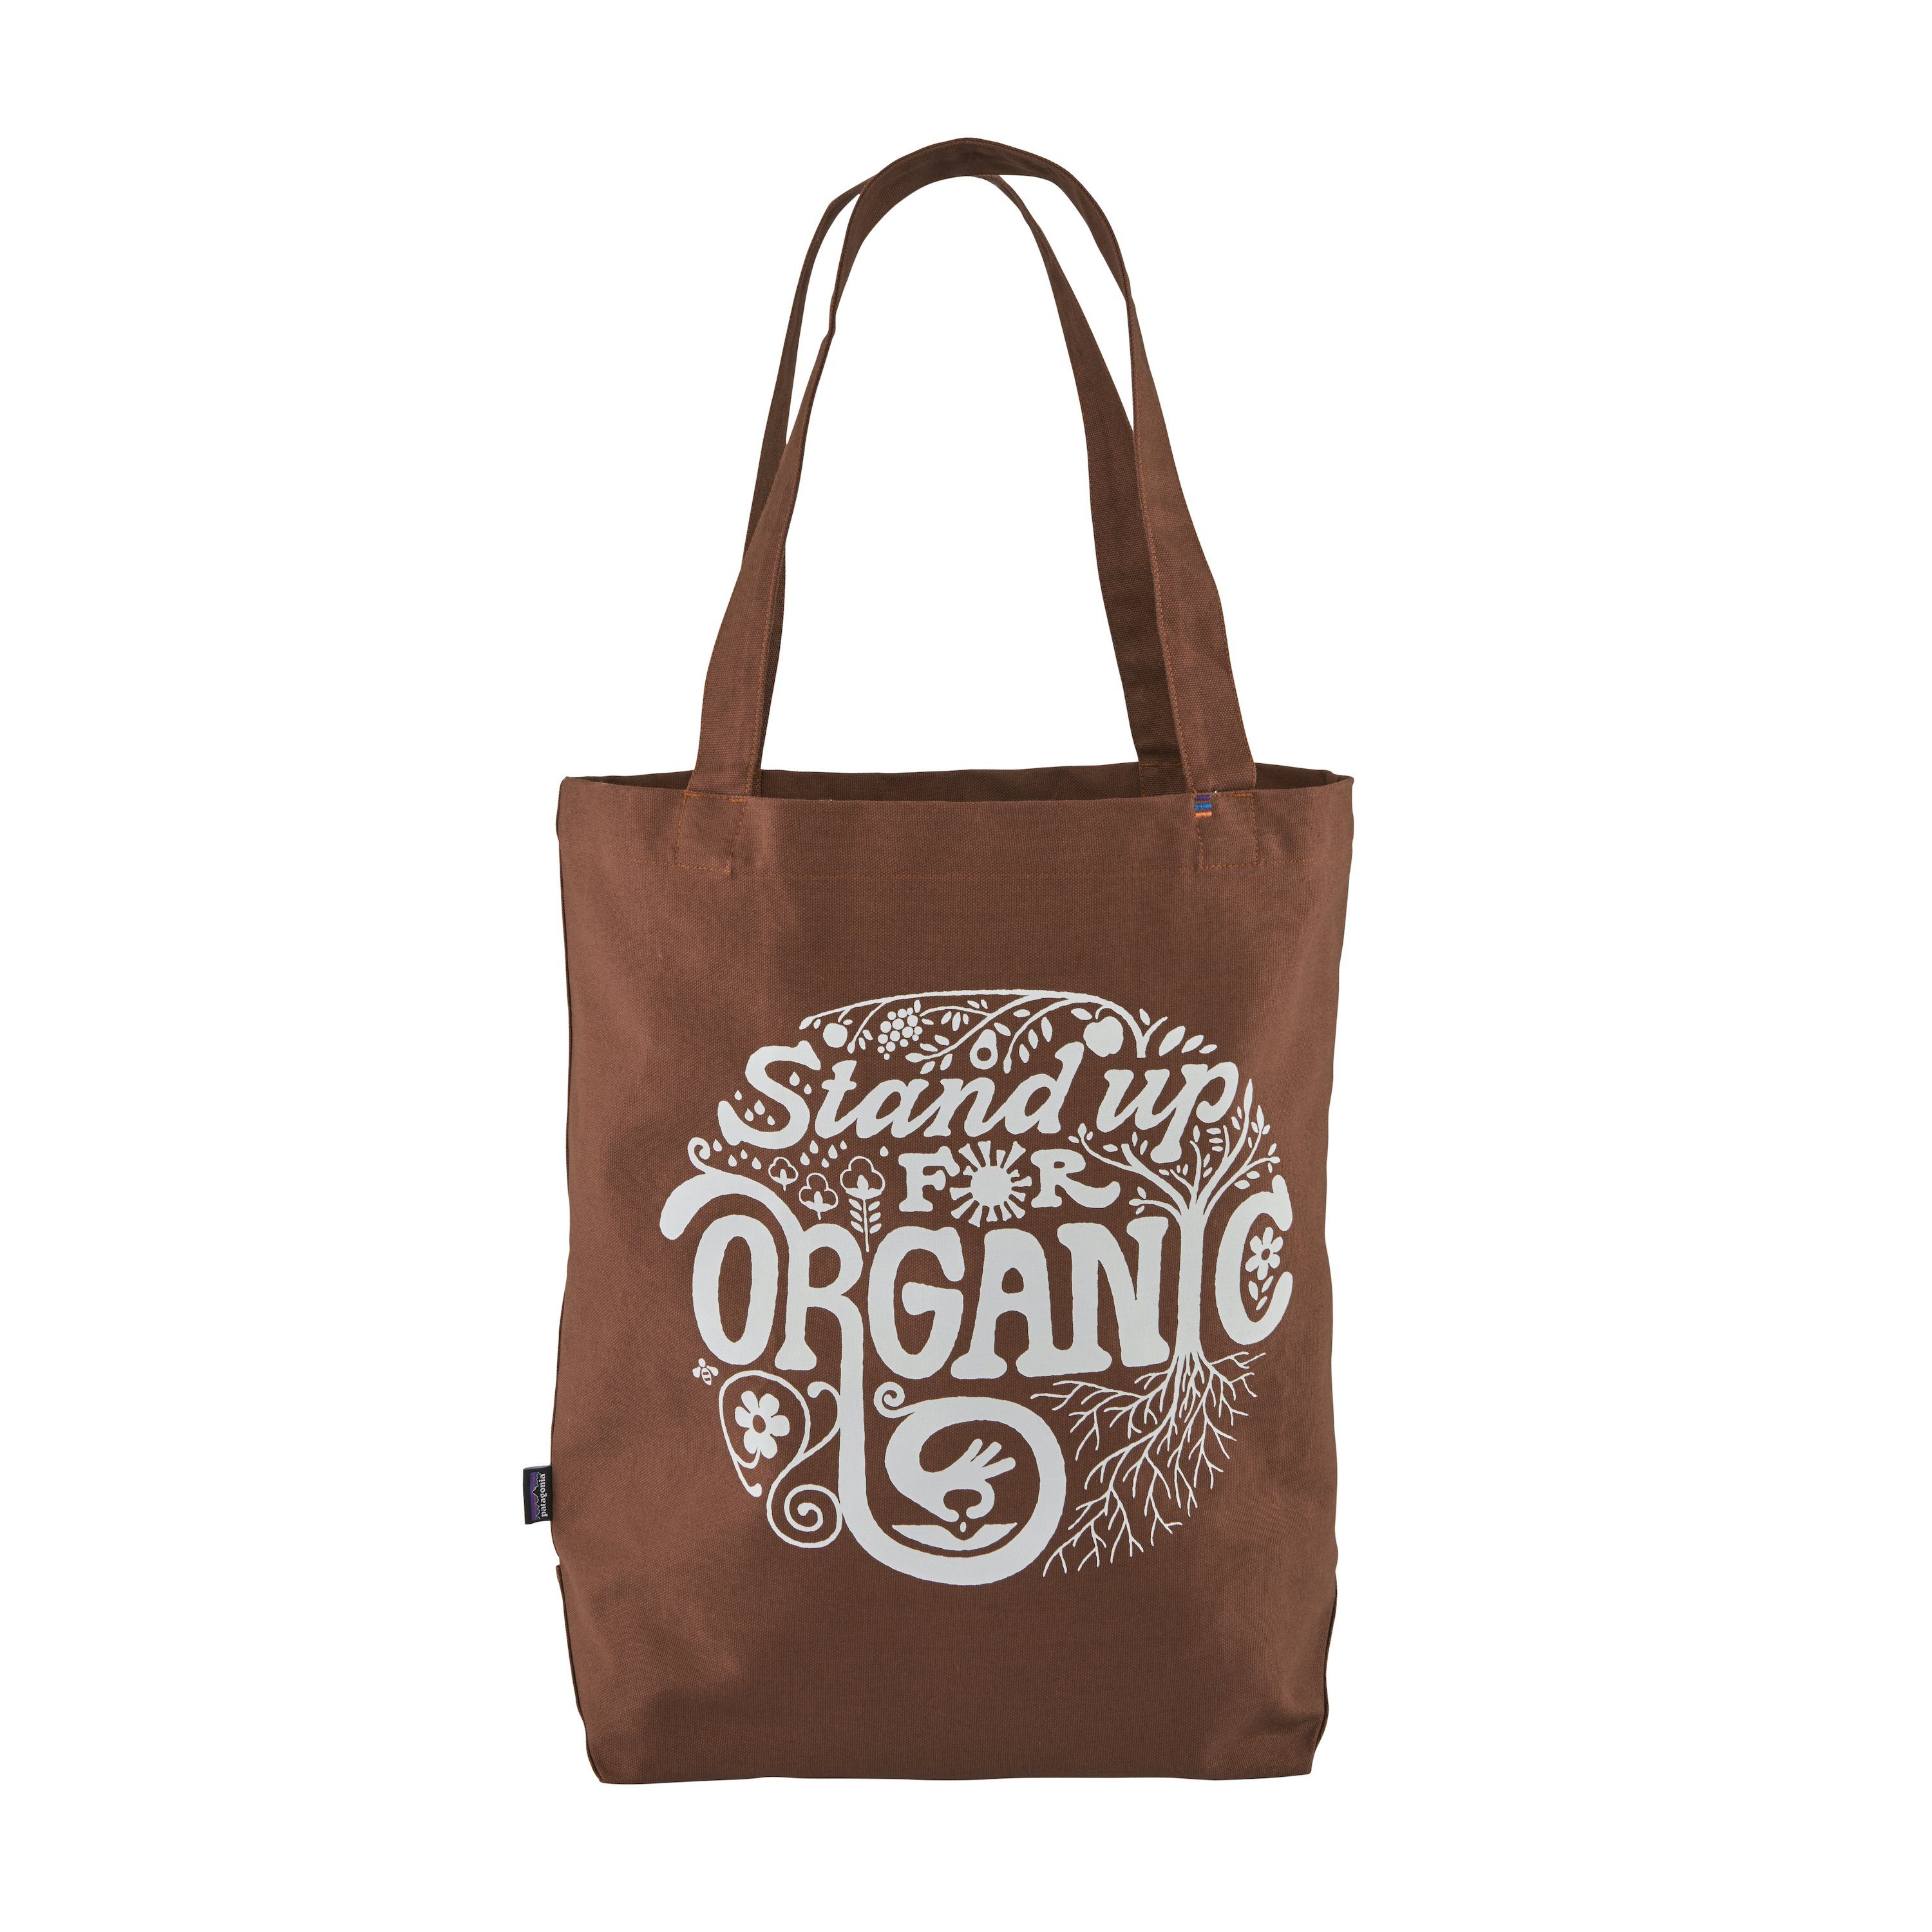 Patagonia Market Tote - Durable Bag from Organic Cotton, Root Revolution Graphic: Earthworm Brown